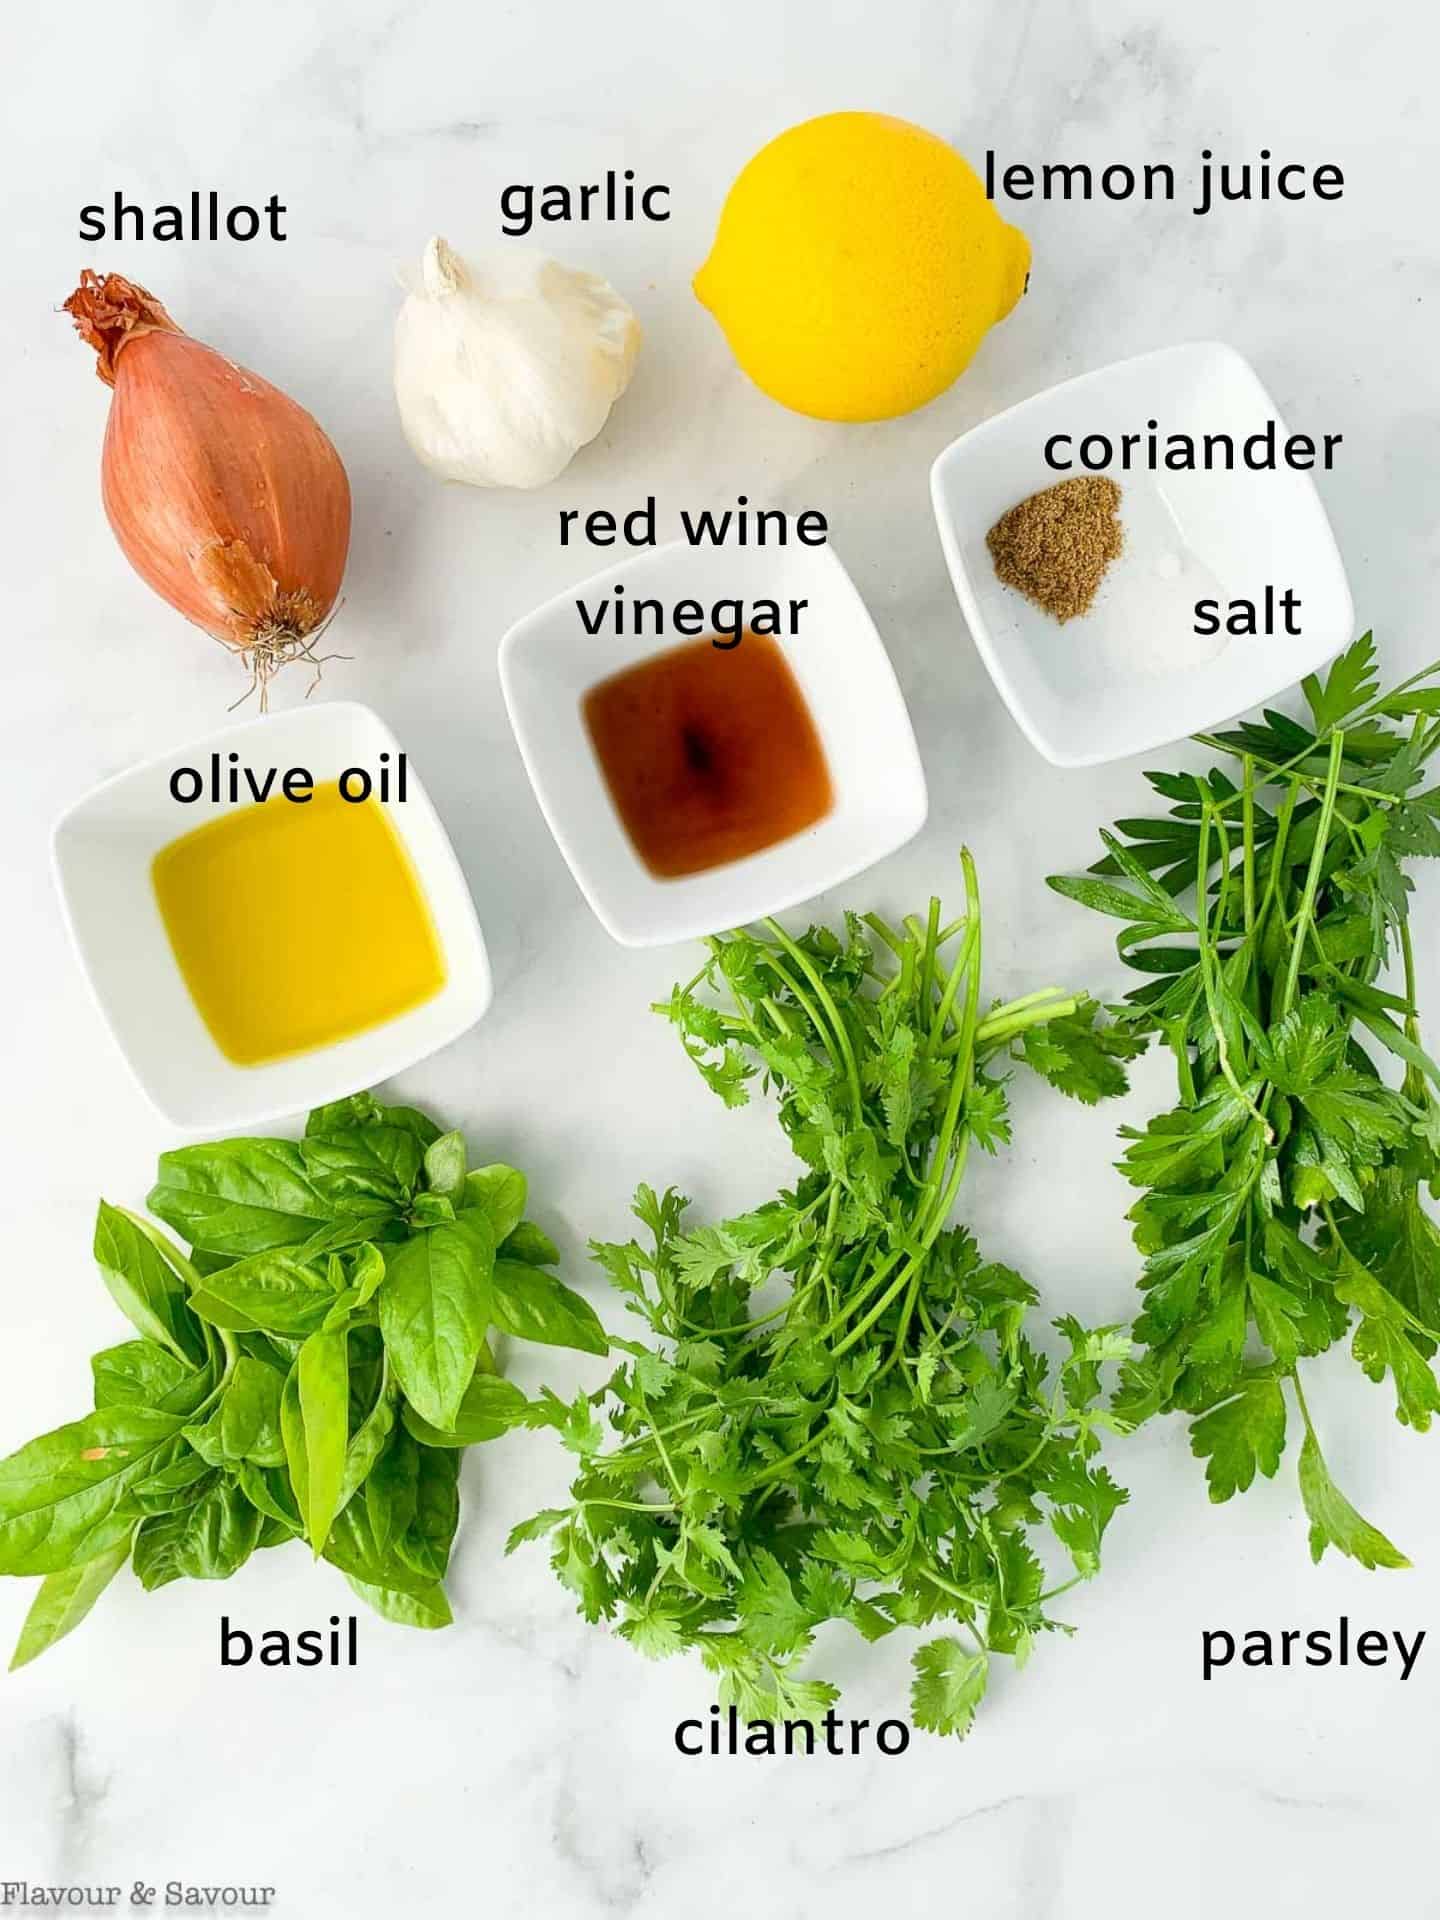 Labelled ingredients for chimichurri sauce.